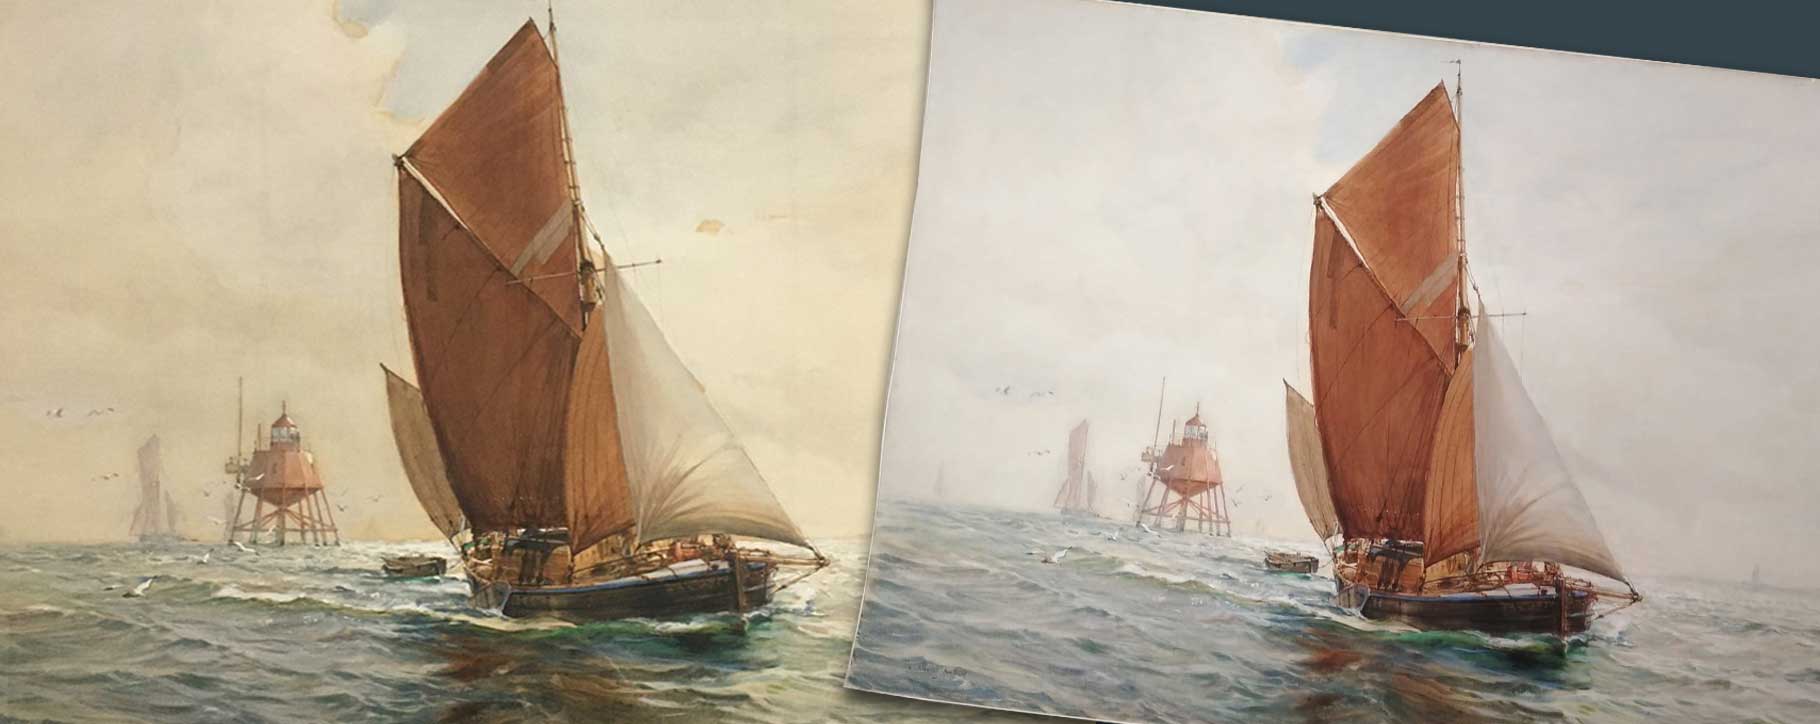 Before and after restoration of boat watercolour